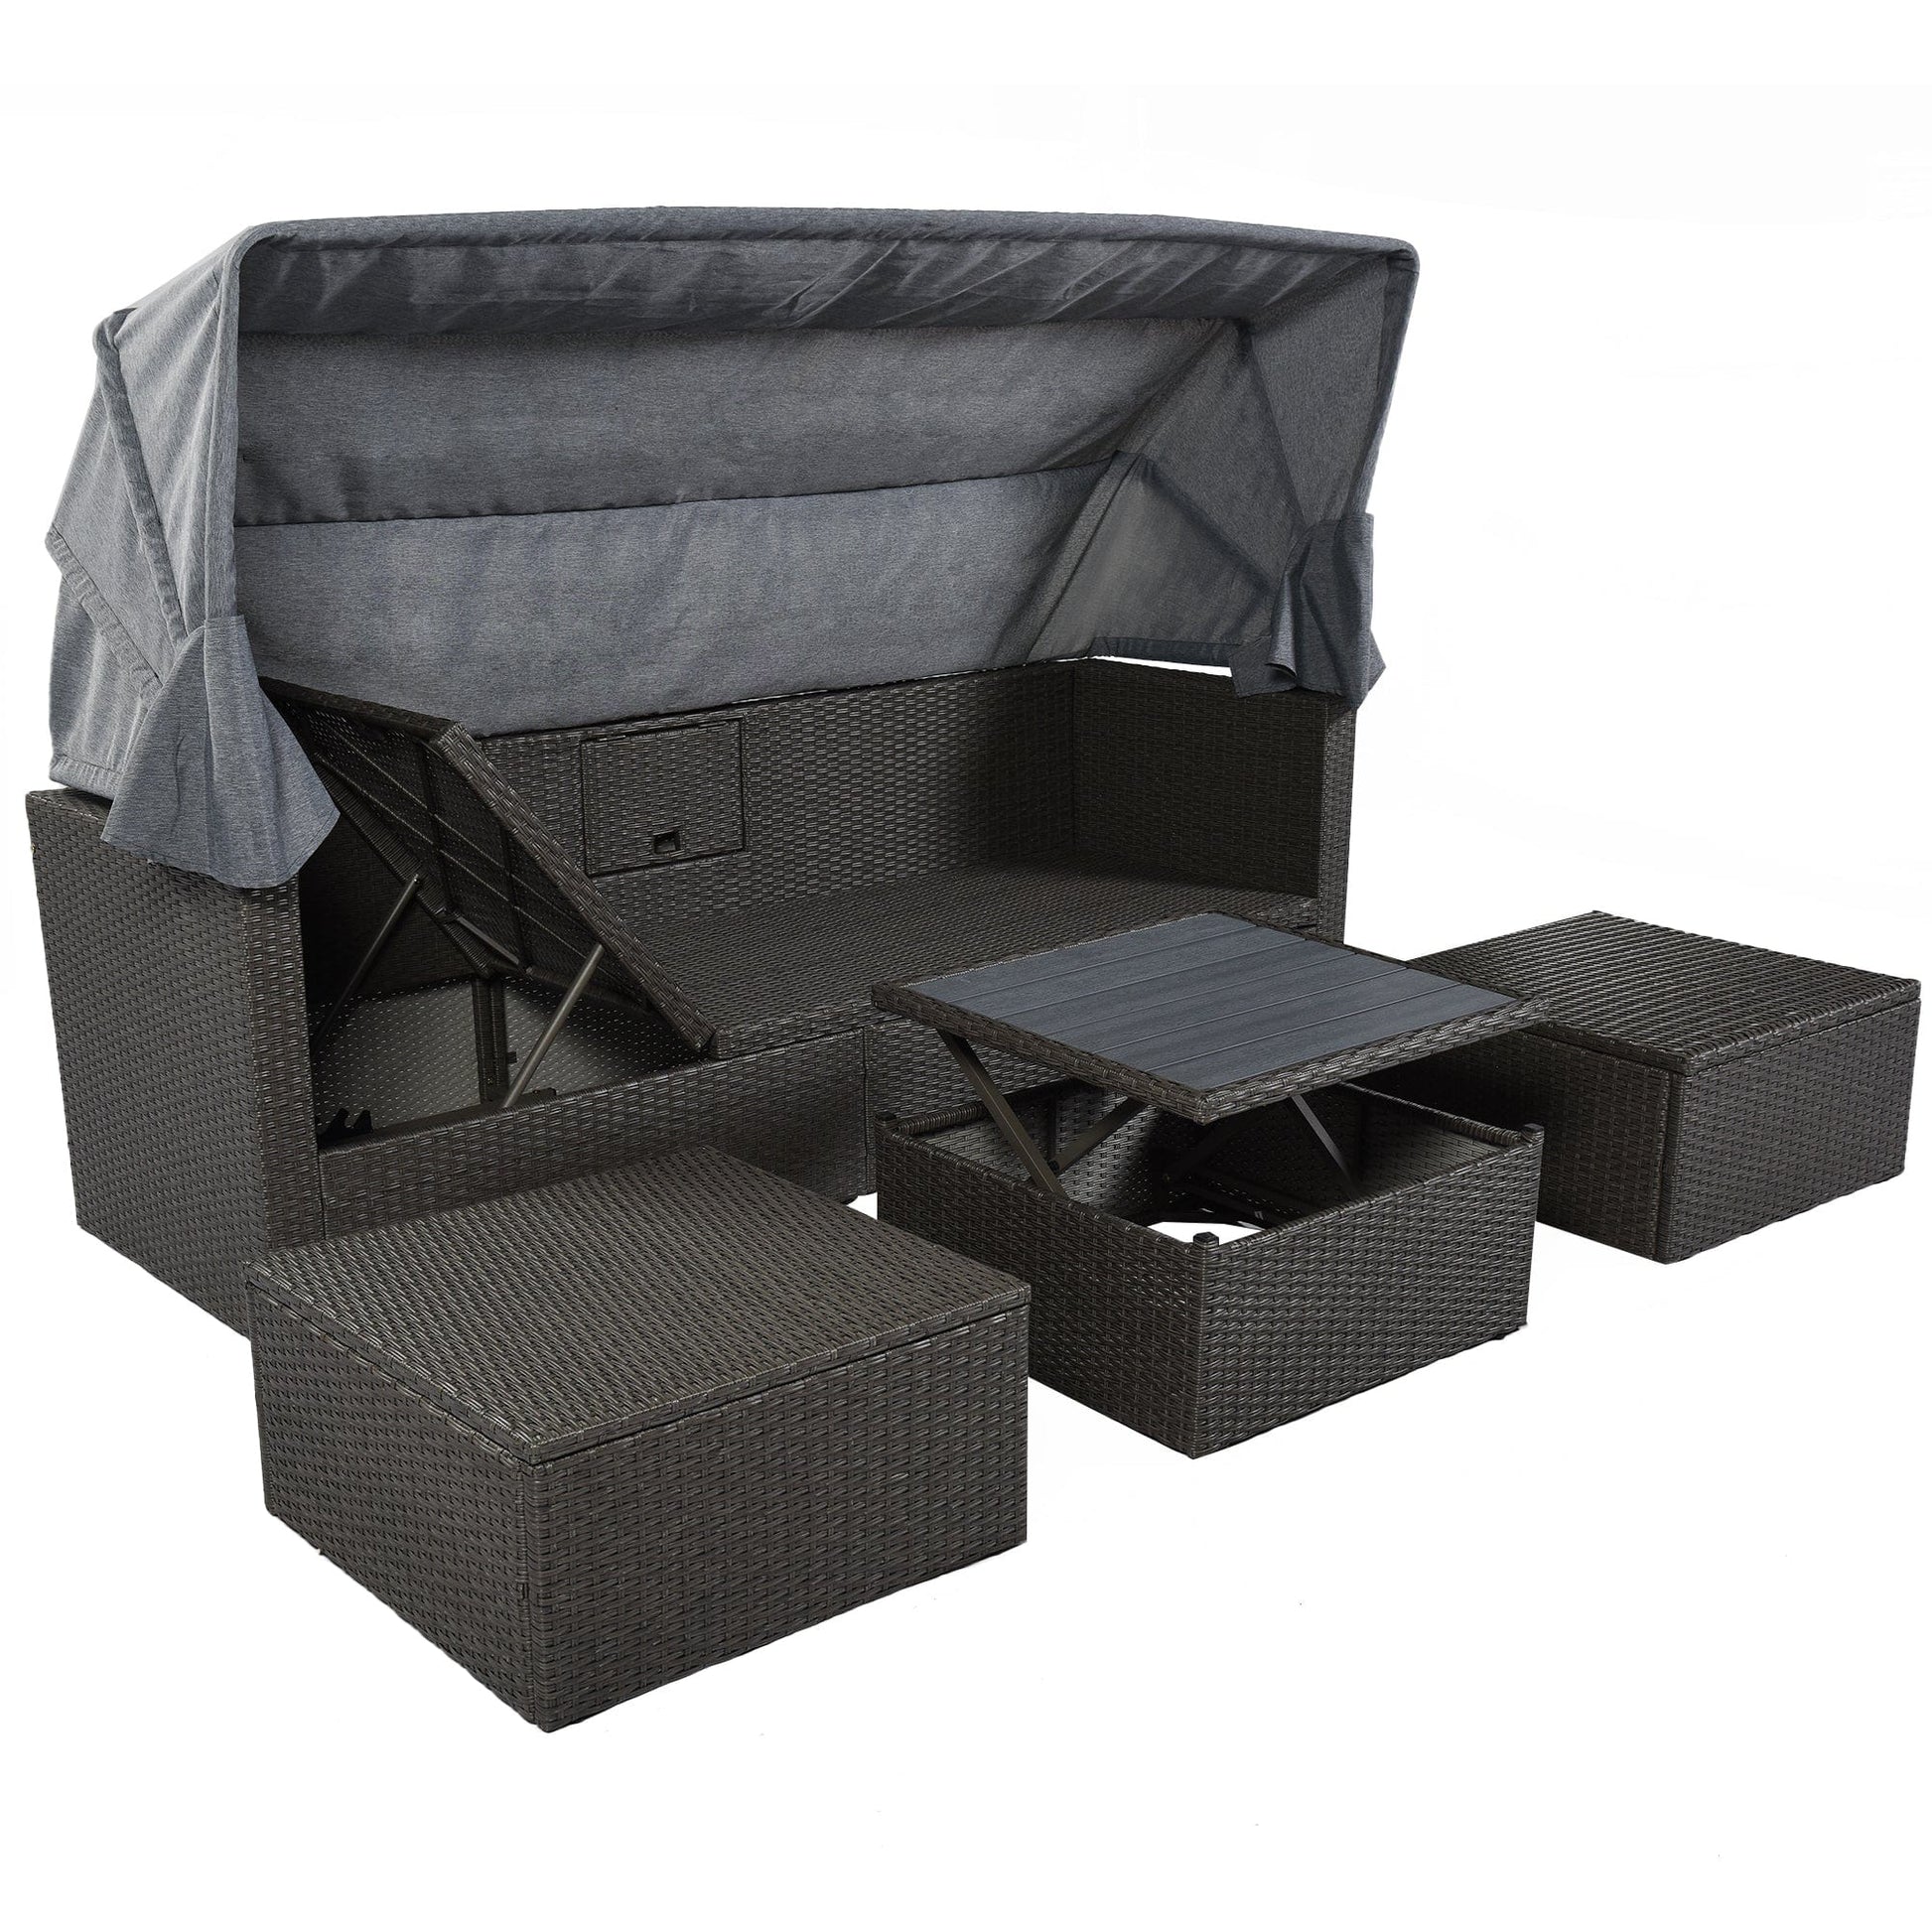 1st Choice Furniture Direct Daybed 1st Choice Wicker Furniture Sectional Daybed with Canopy